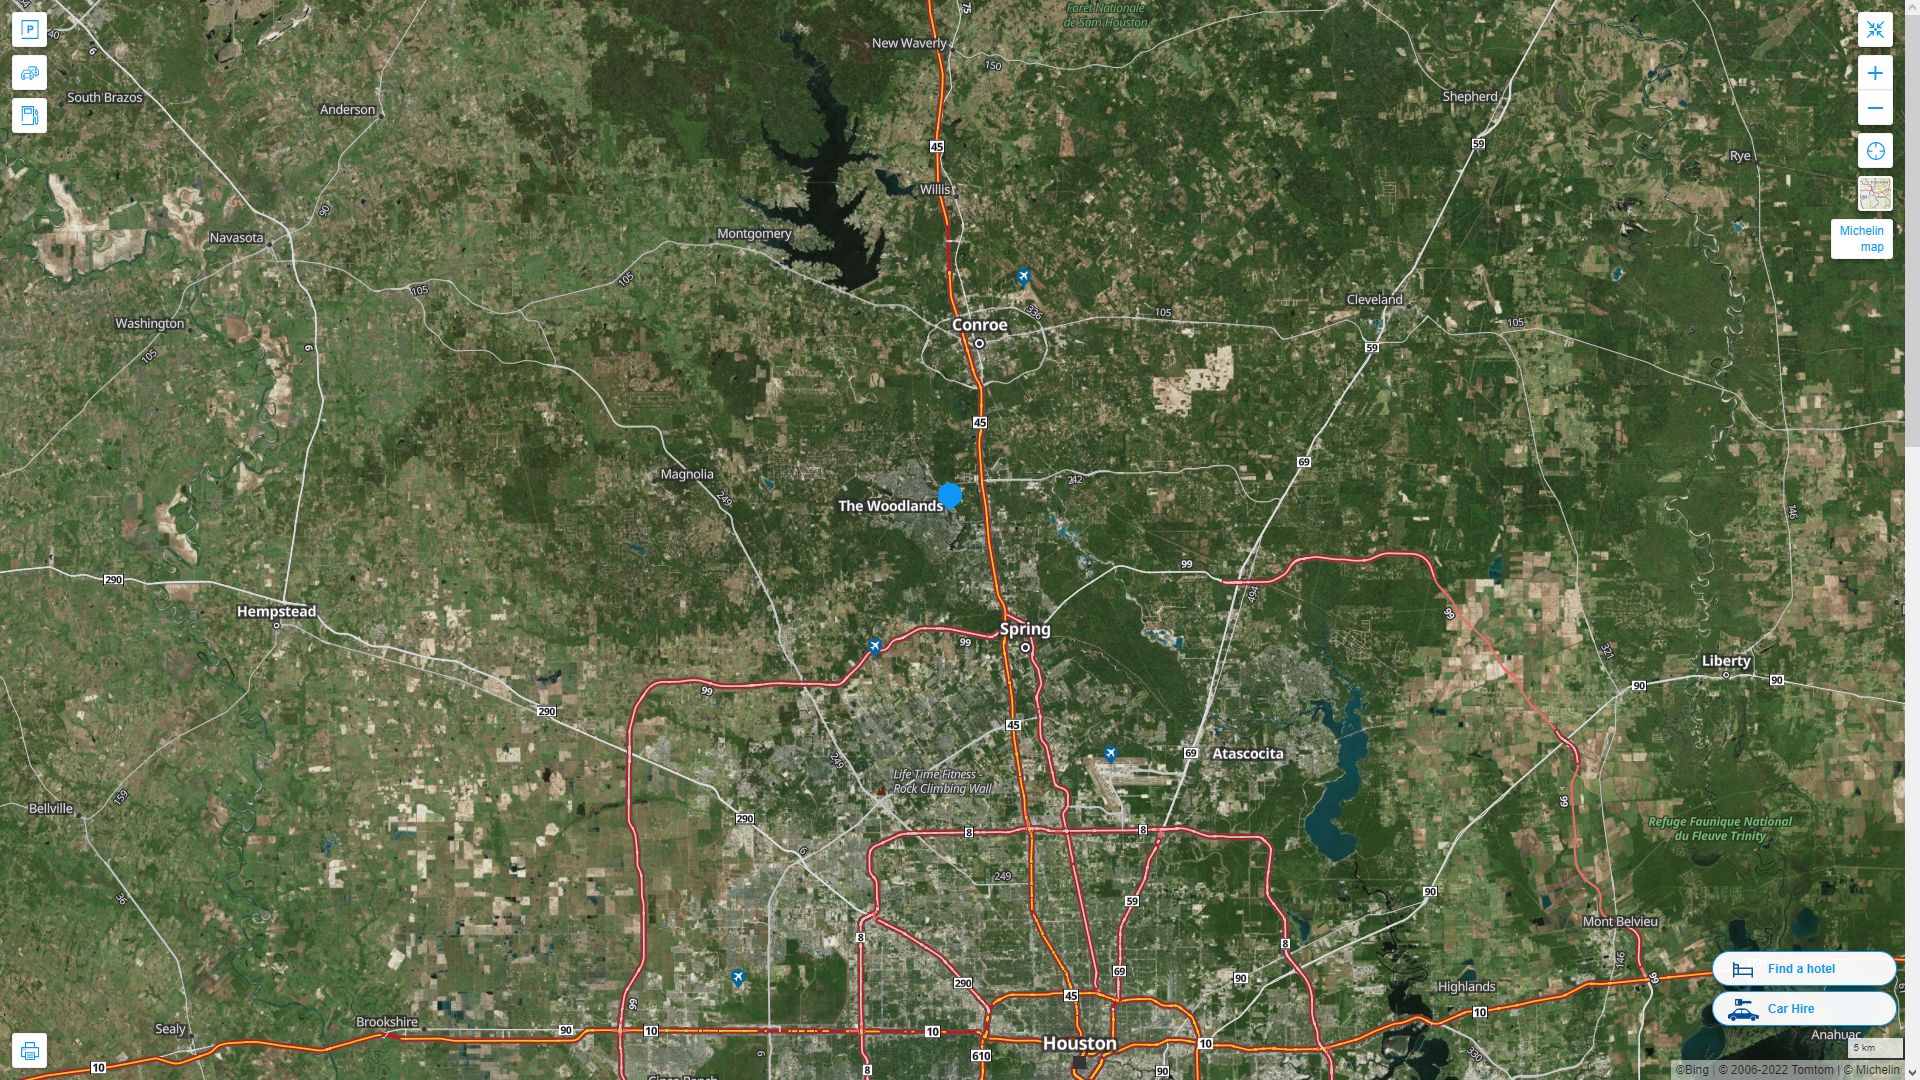 The Woodlands Texas Highway and Road Map with Satellite View